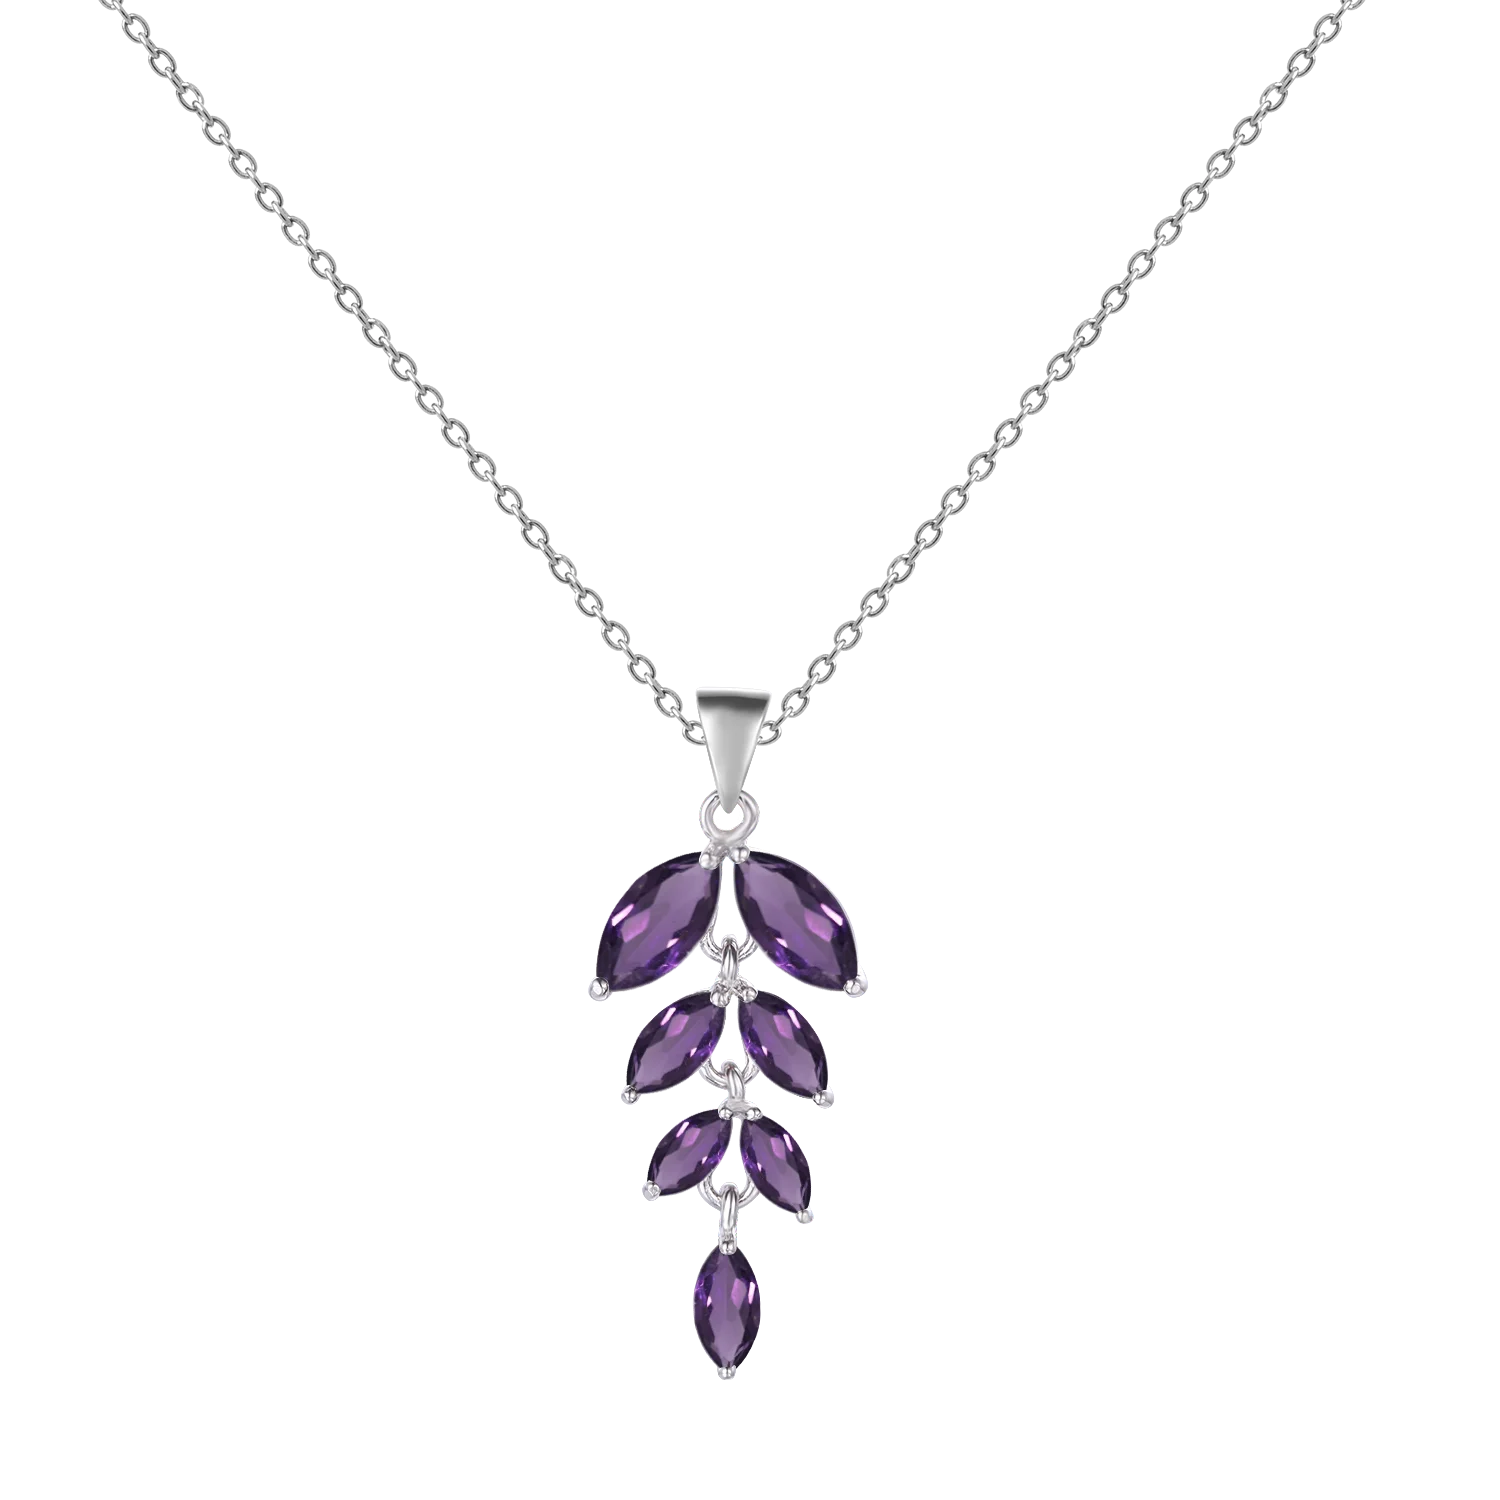 Gem's Ballet Olive Branch Peace Necklace Natural Black Garnet Gemstone Pendant Necklace in 925 Sterling Silver with 18" Chain Amethyst